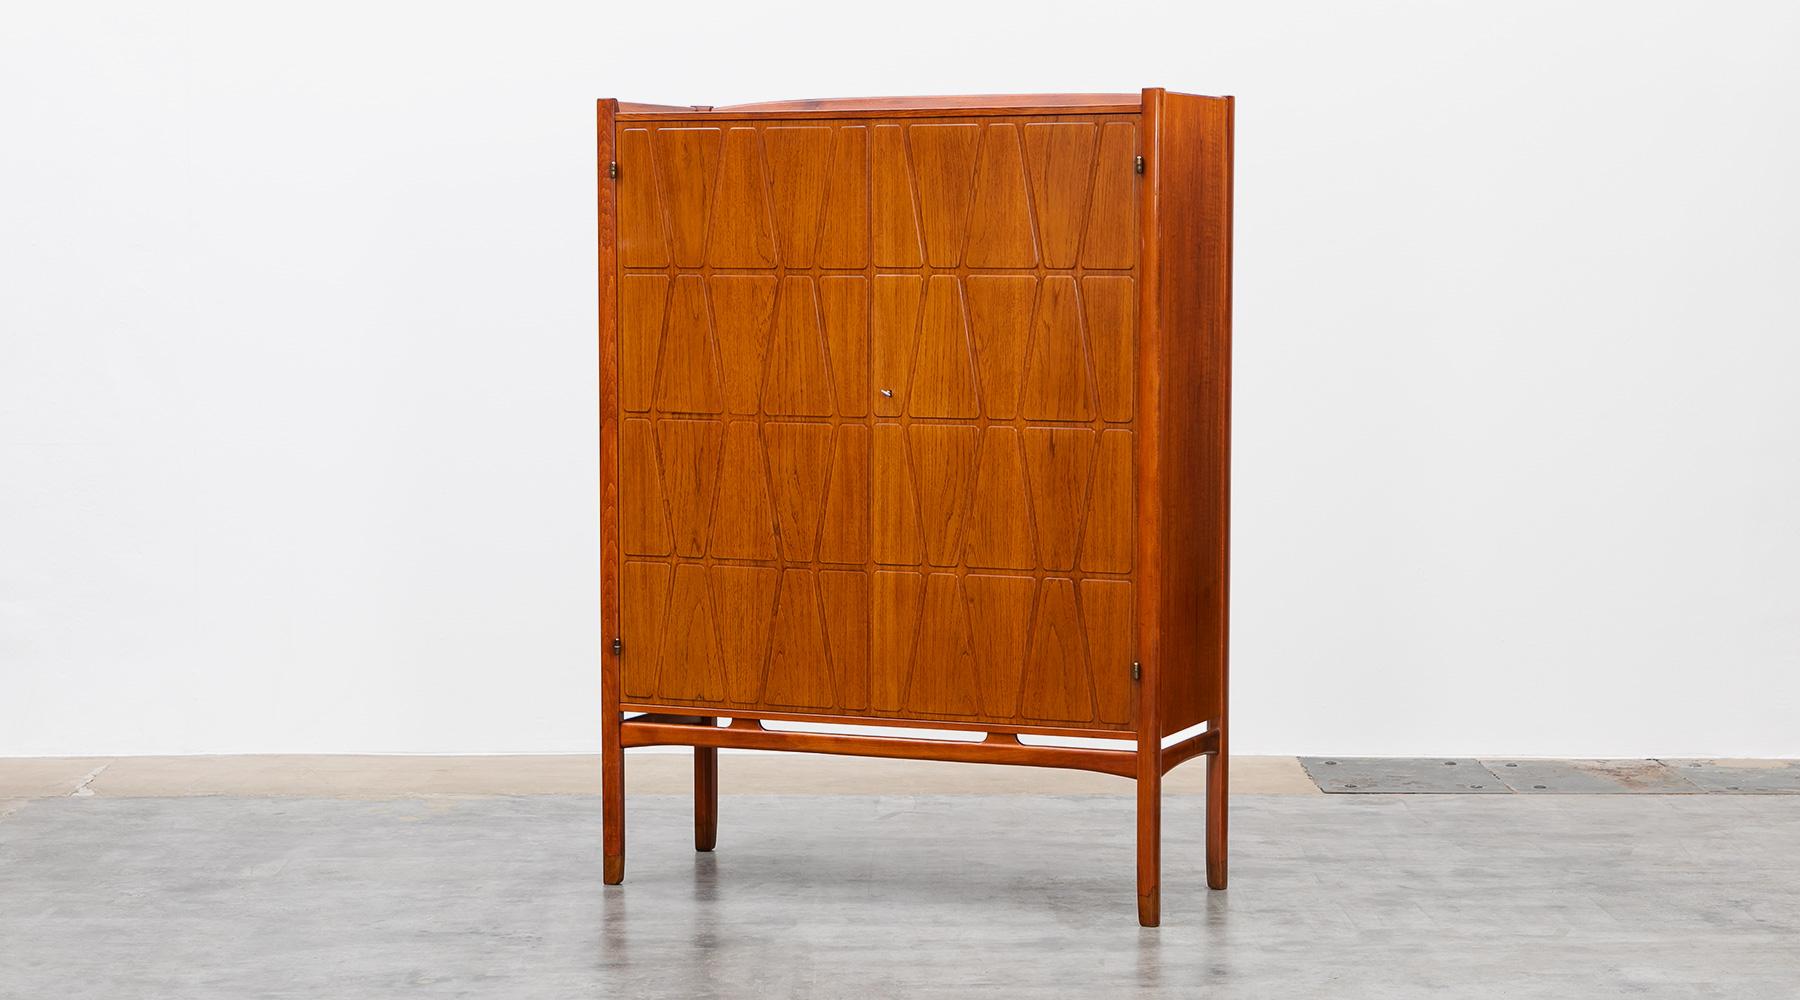 Highboard, teak and oak frame, Yngve Ekström, Sweden, 1950.

The cabinet in teak is designed by Yngve Ekström. Two beautiful teak doors with milled relief decor, interior with pullout trays and shelves. Teak-capped legs and oak